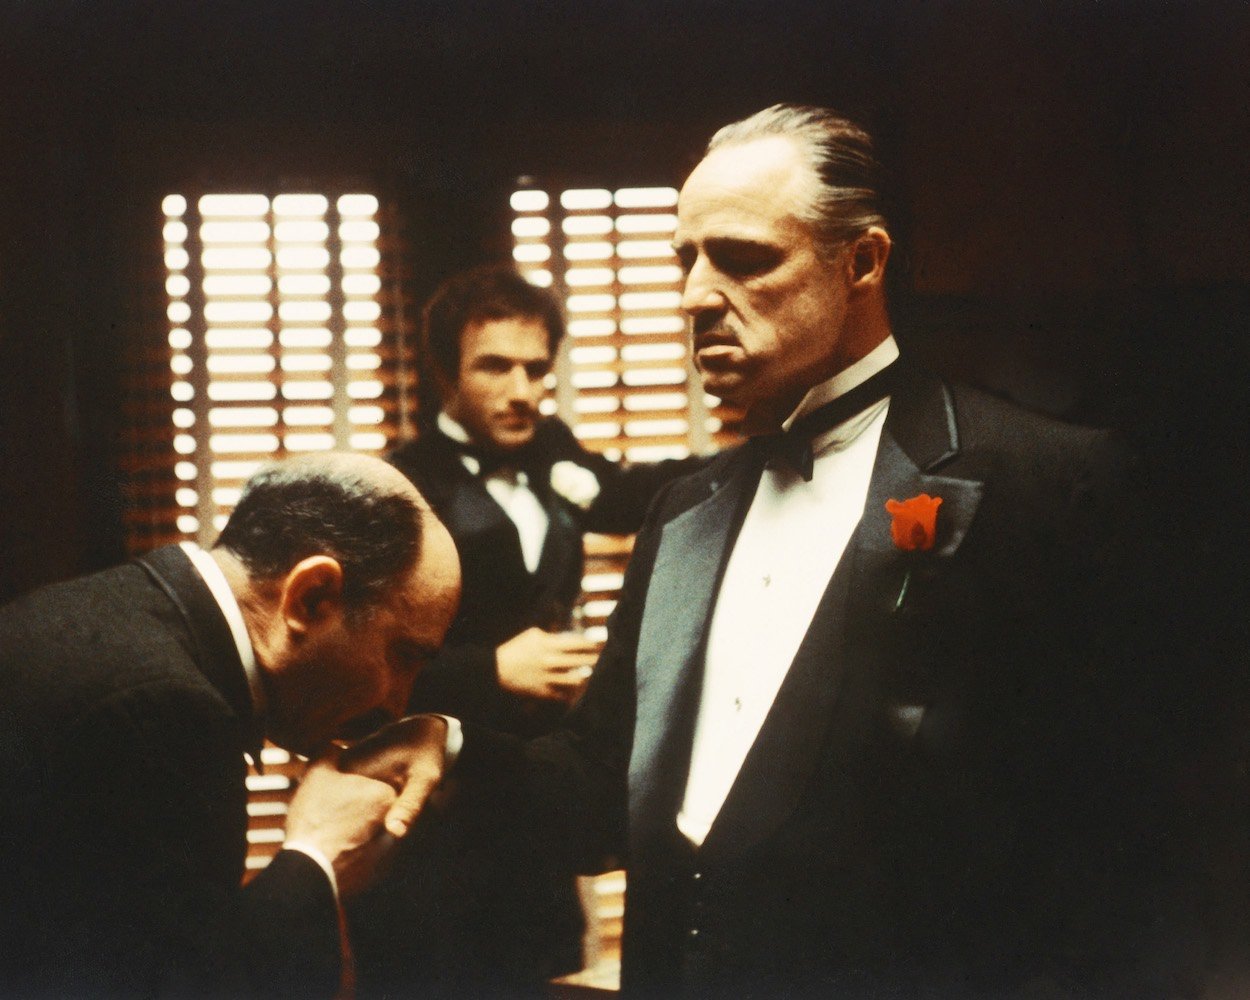 Salvatore Corsitto (from left), James Caan, and Marlon Brando in 'The Godfather.' For the right price, anyone can book an Airbnb stay at 'The Godfather' mansion that featured so prominently in the movie.